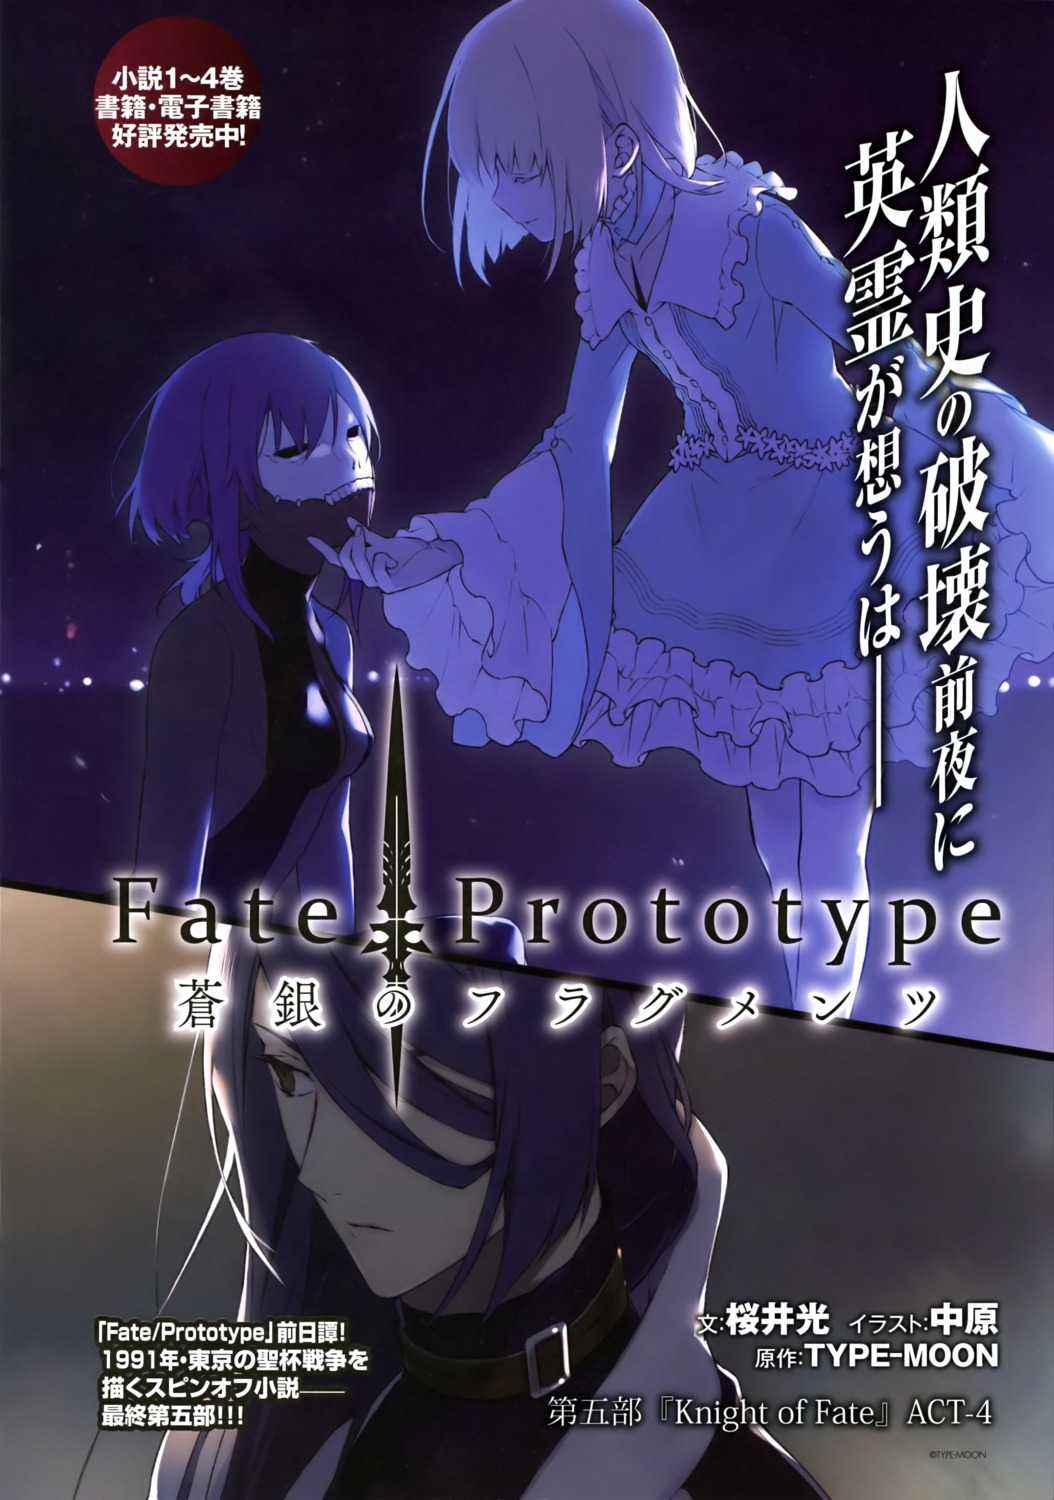 binding_discoloration caster_(fate/prototype:_fragments) cleavage dress fate/prototype fate/prototype:_fragments_of_blue_and_silver fate/stay_night hassan_of_serenity_(fate) nakahara no_bra type-moon